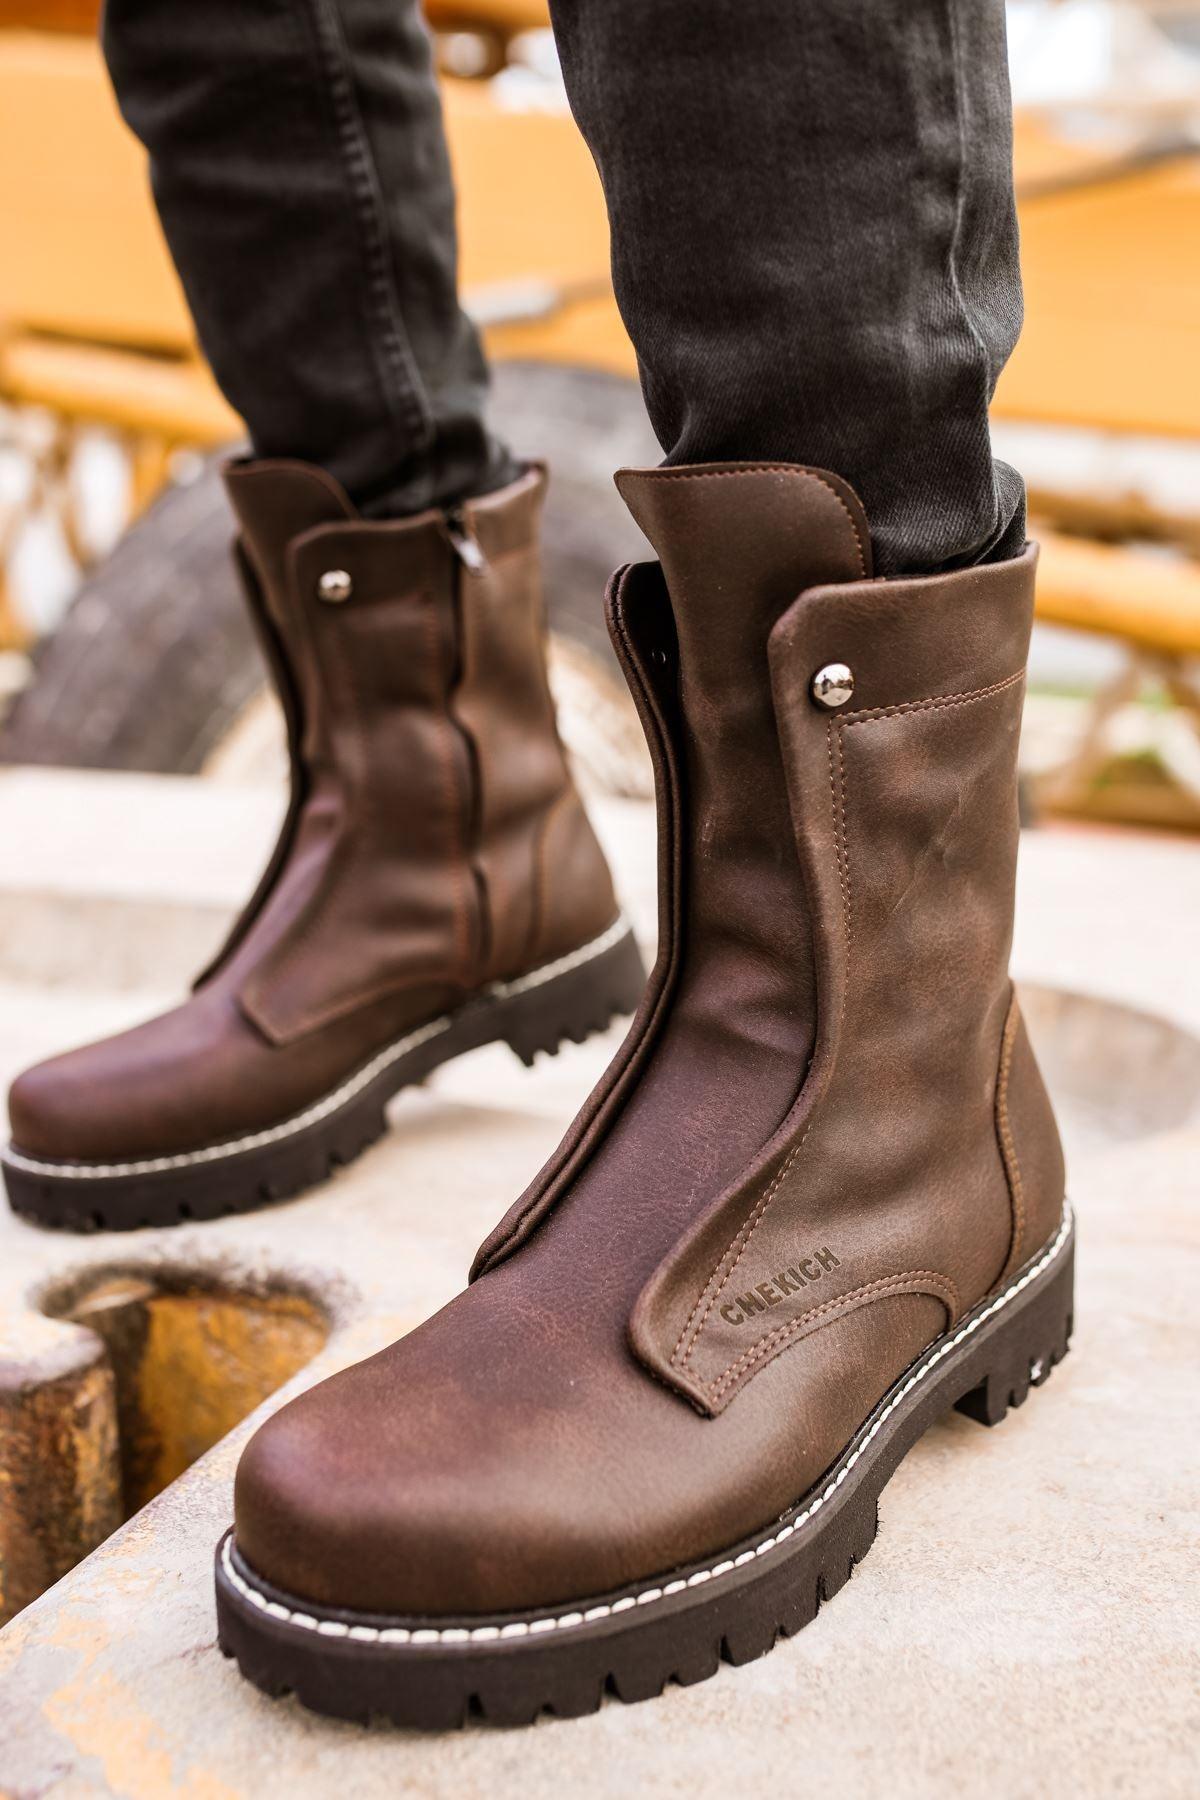 CH027 Men's  Brown-Black Sole Casual Winter Boots - STREET MODE ™